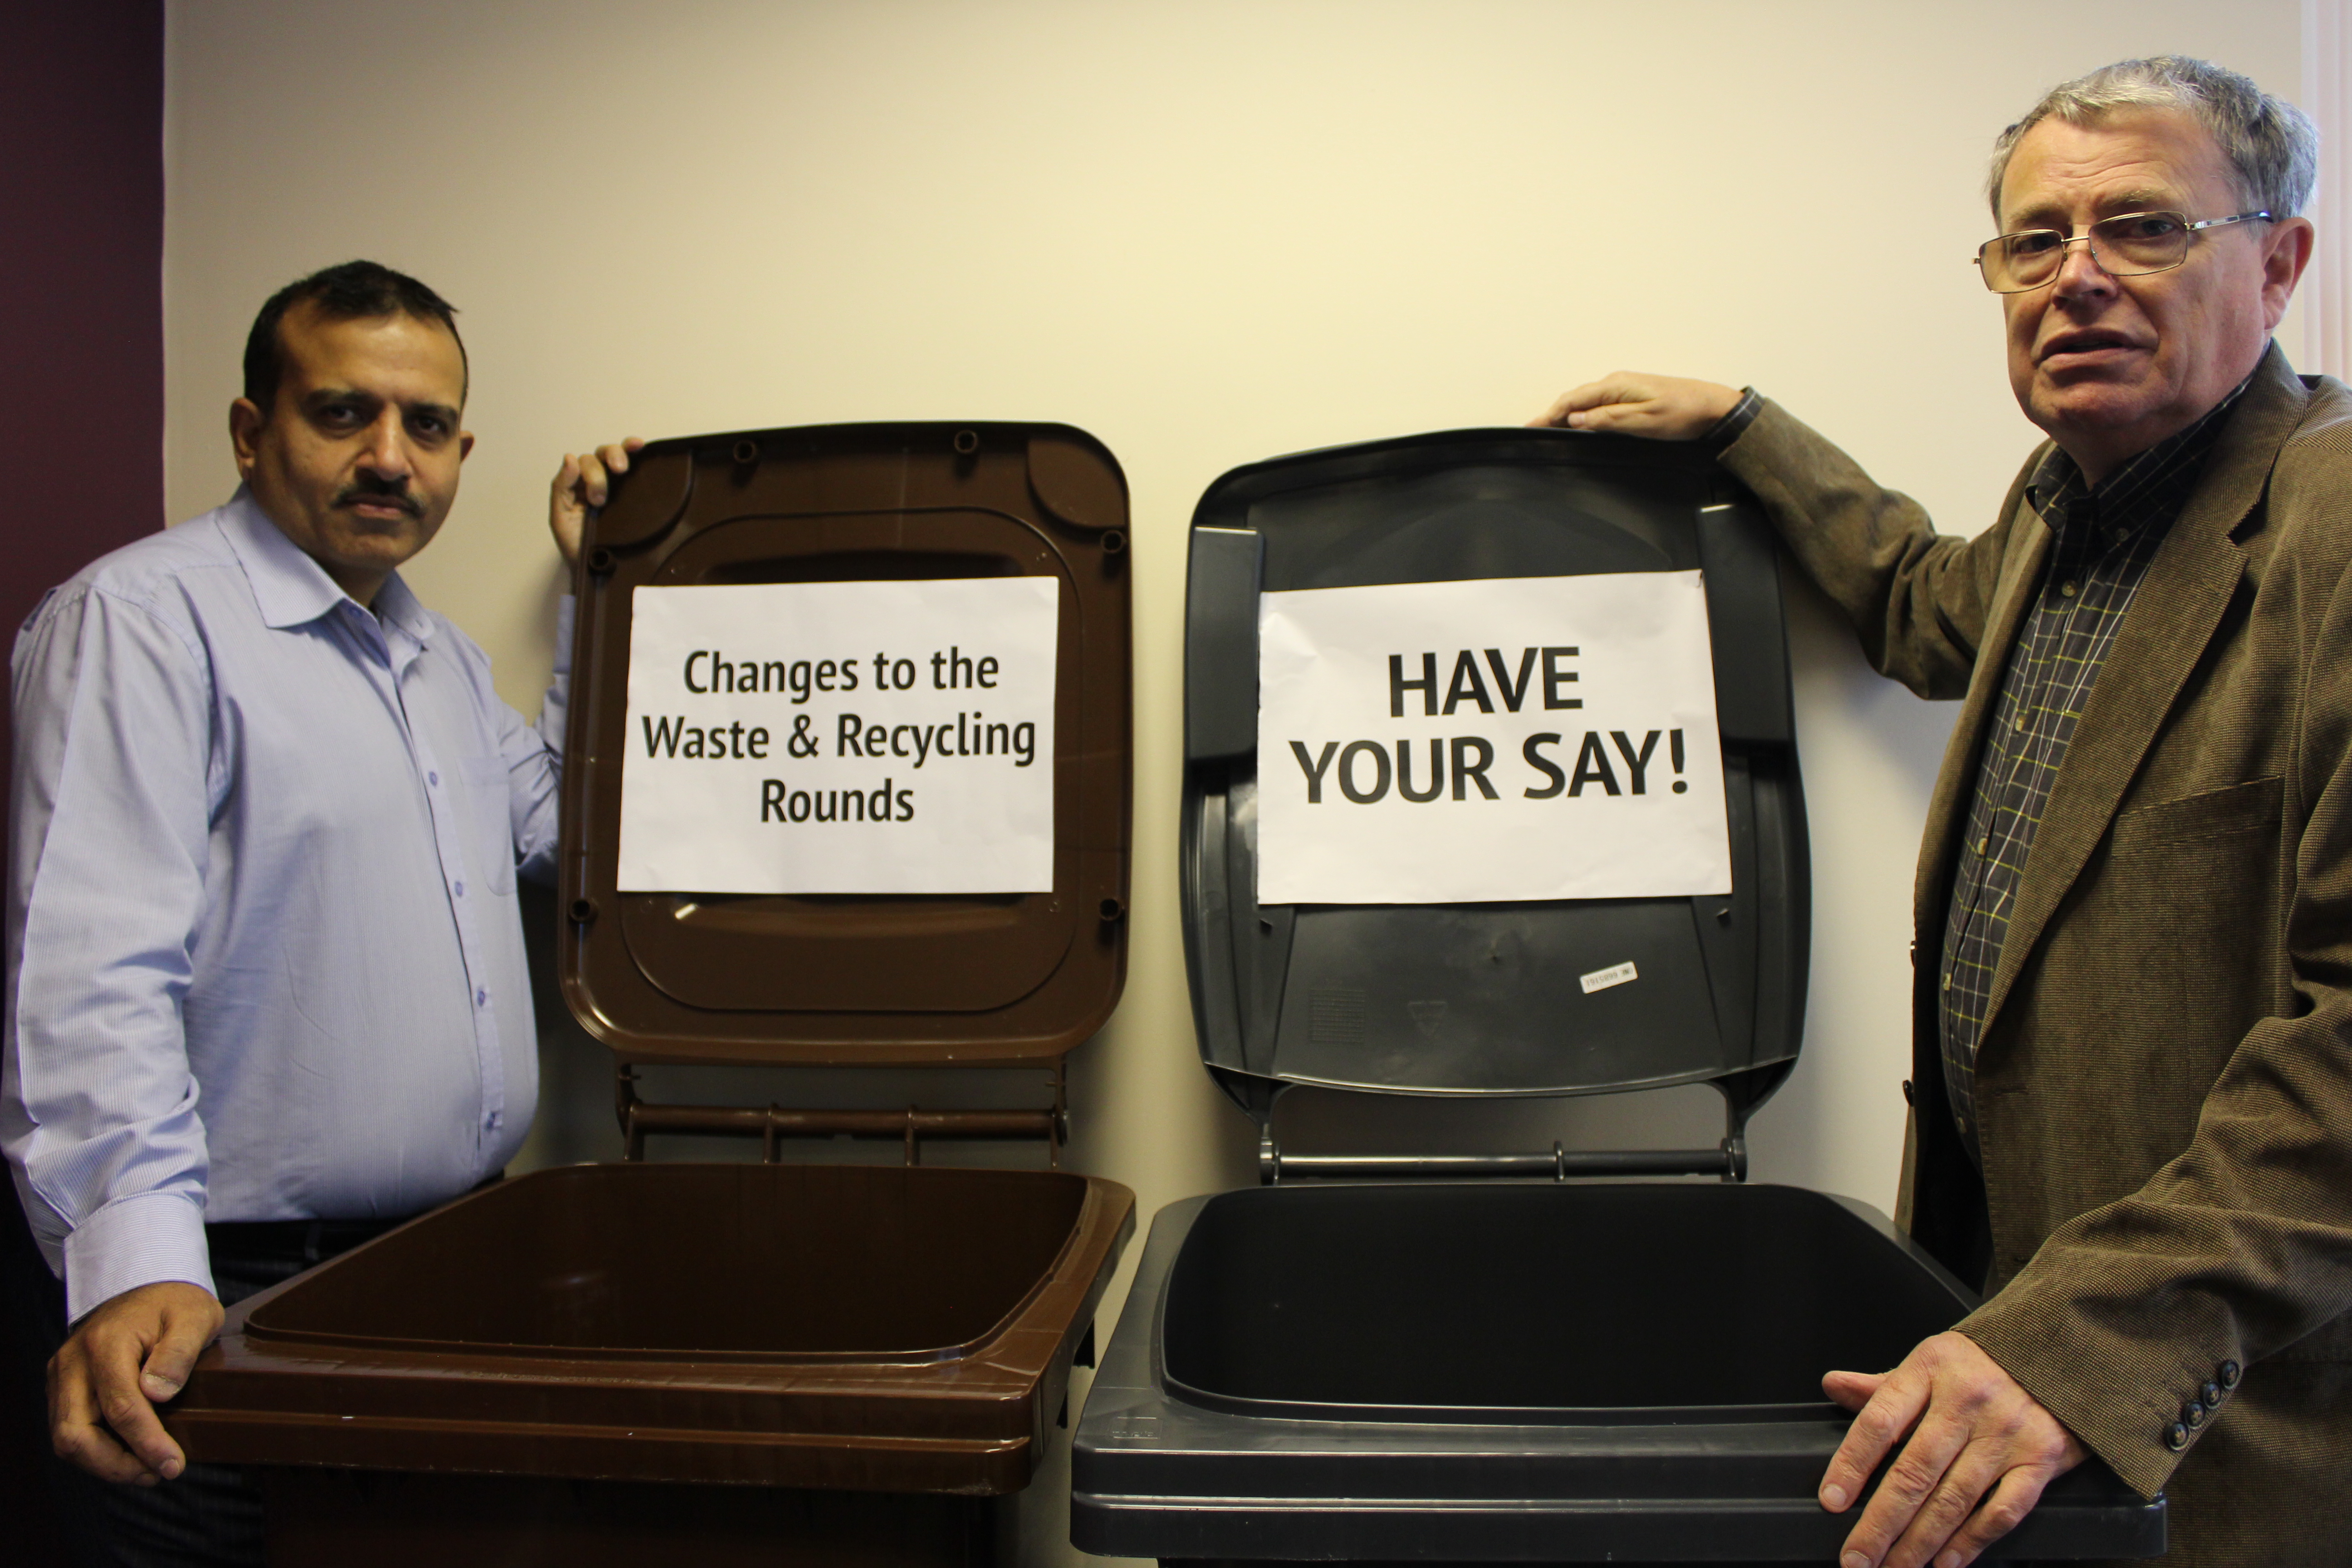 Last chance! Have your say on proposals to change refuse and recycling collections